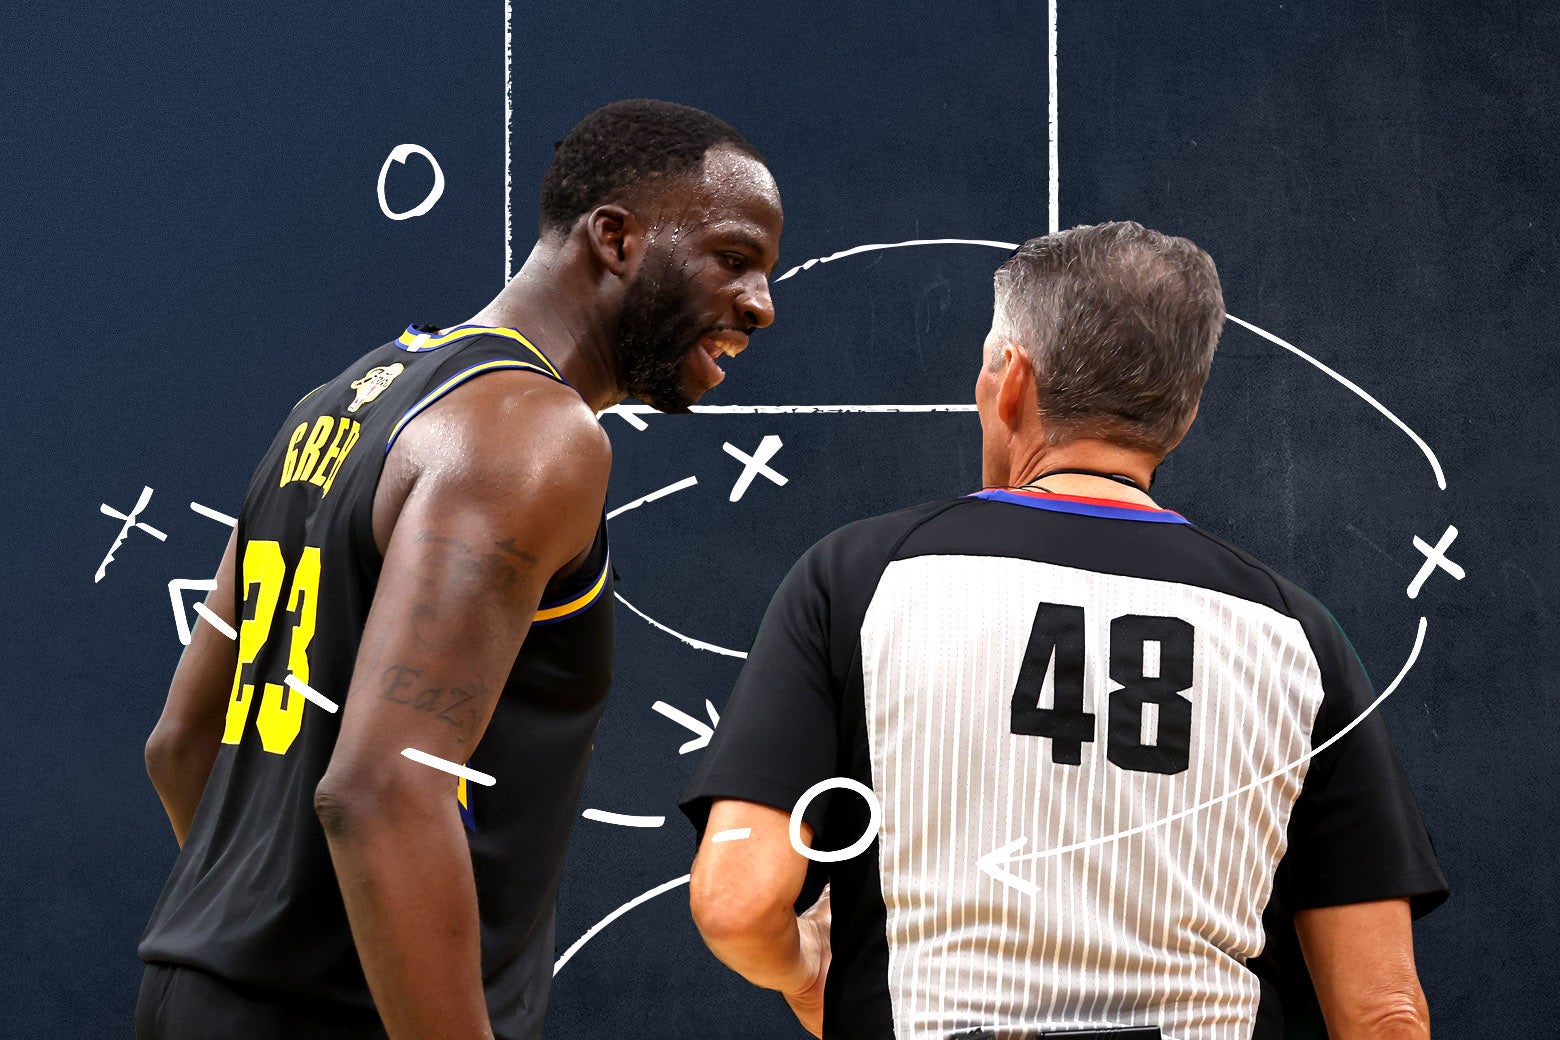 Green argues with a referee, an Xes-and-Os-and-arrows play illustrated behind them.